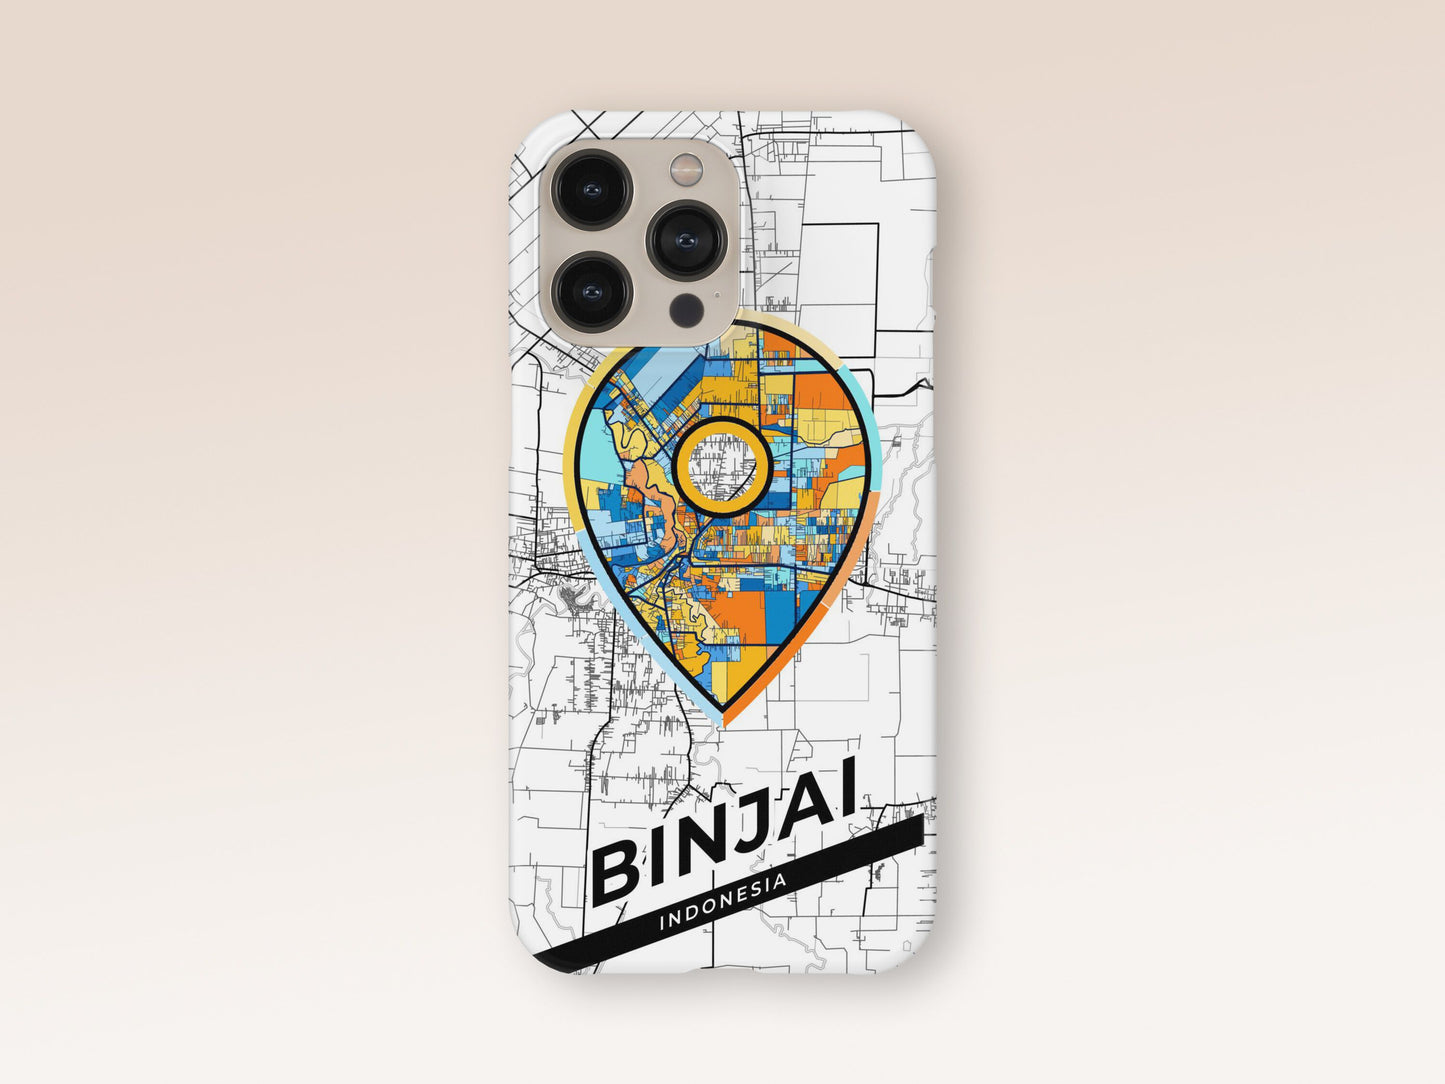 Binjai Indonesia slim phone case with colorful icon. Birthday, wedding or housewarming gift. Couple match cases. 1